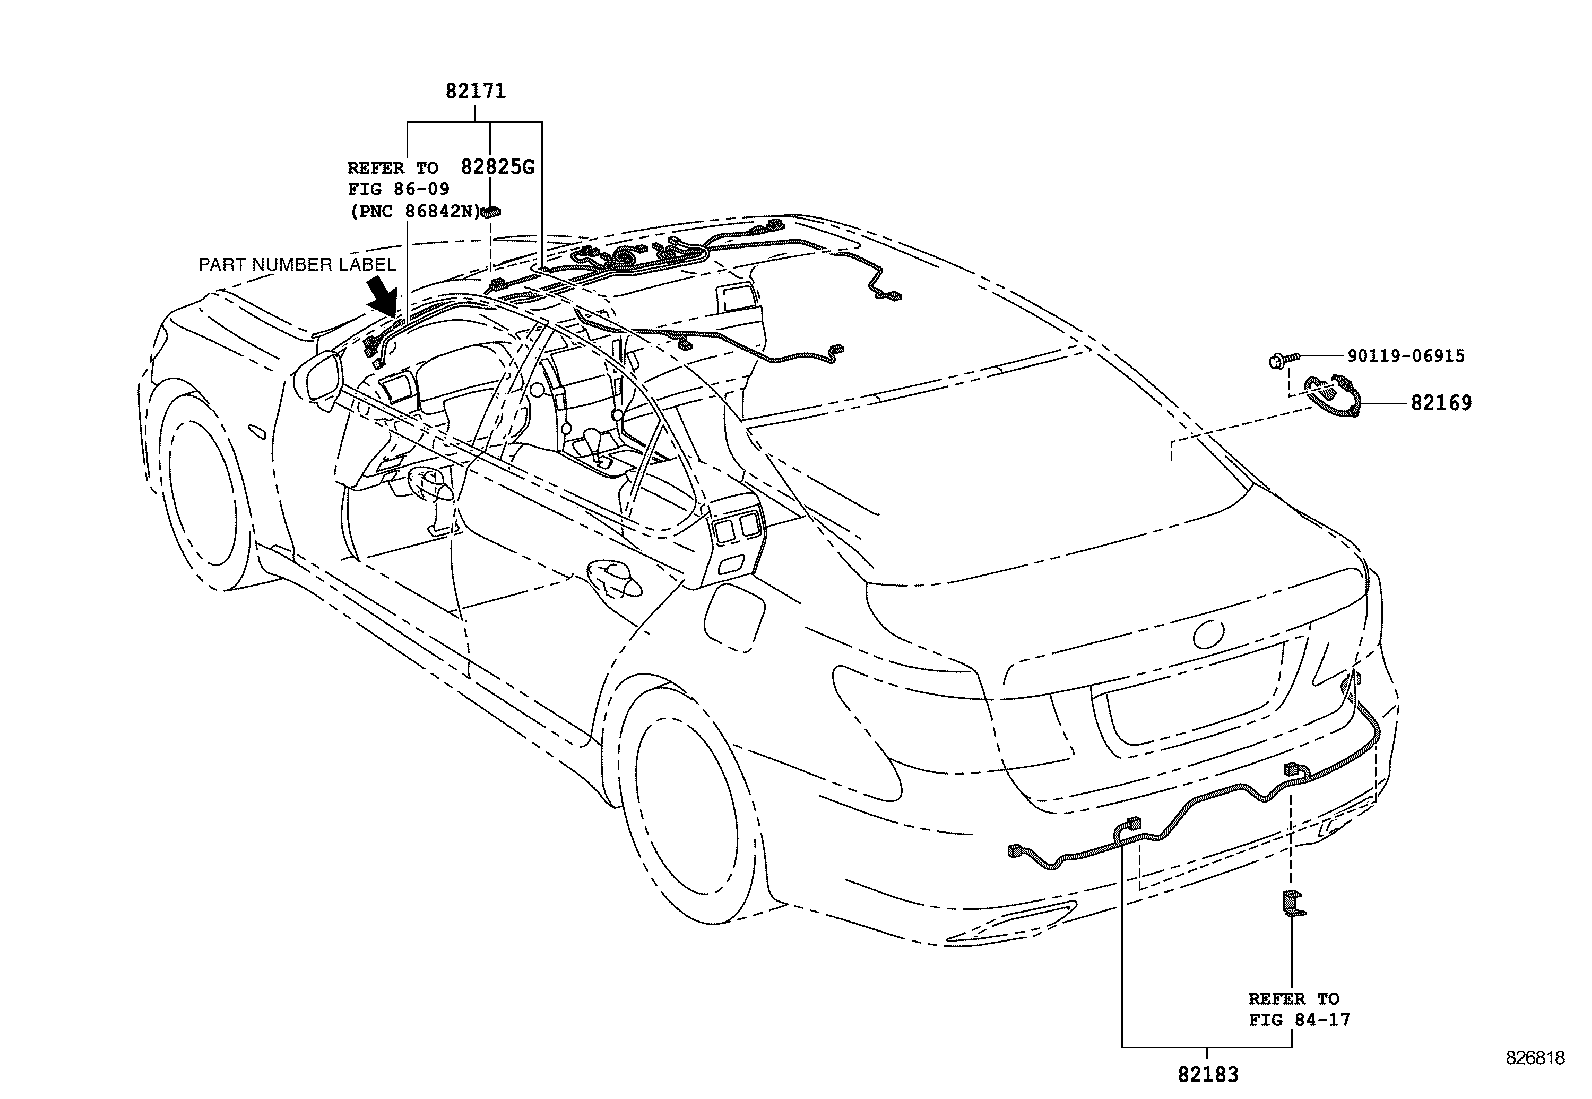  LS600H 600HL |  WIRING CLAMP